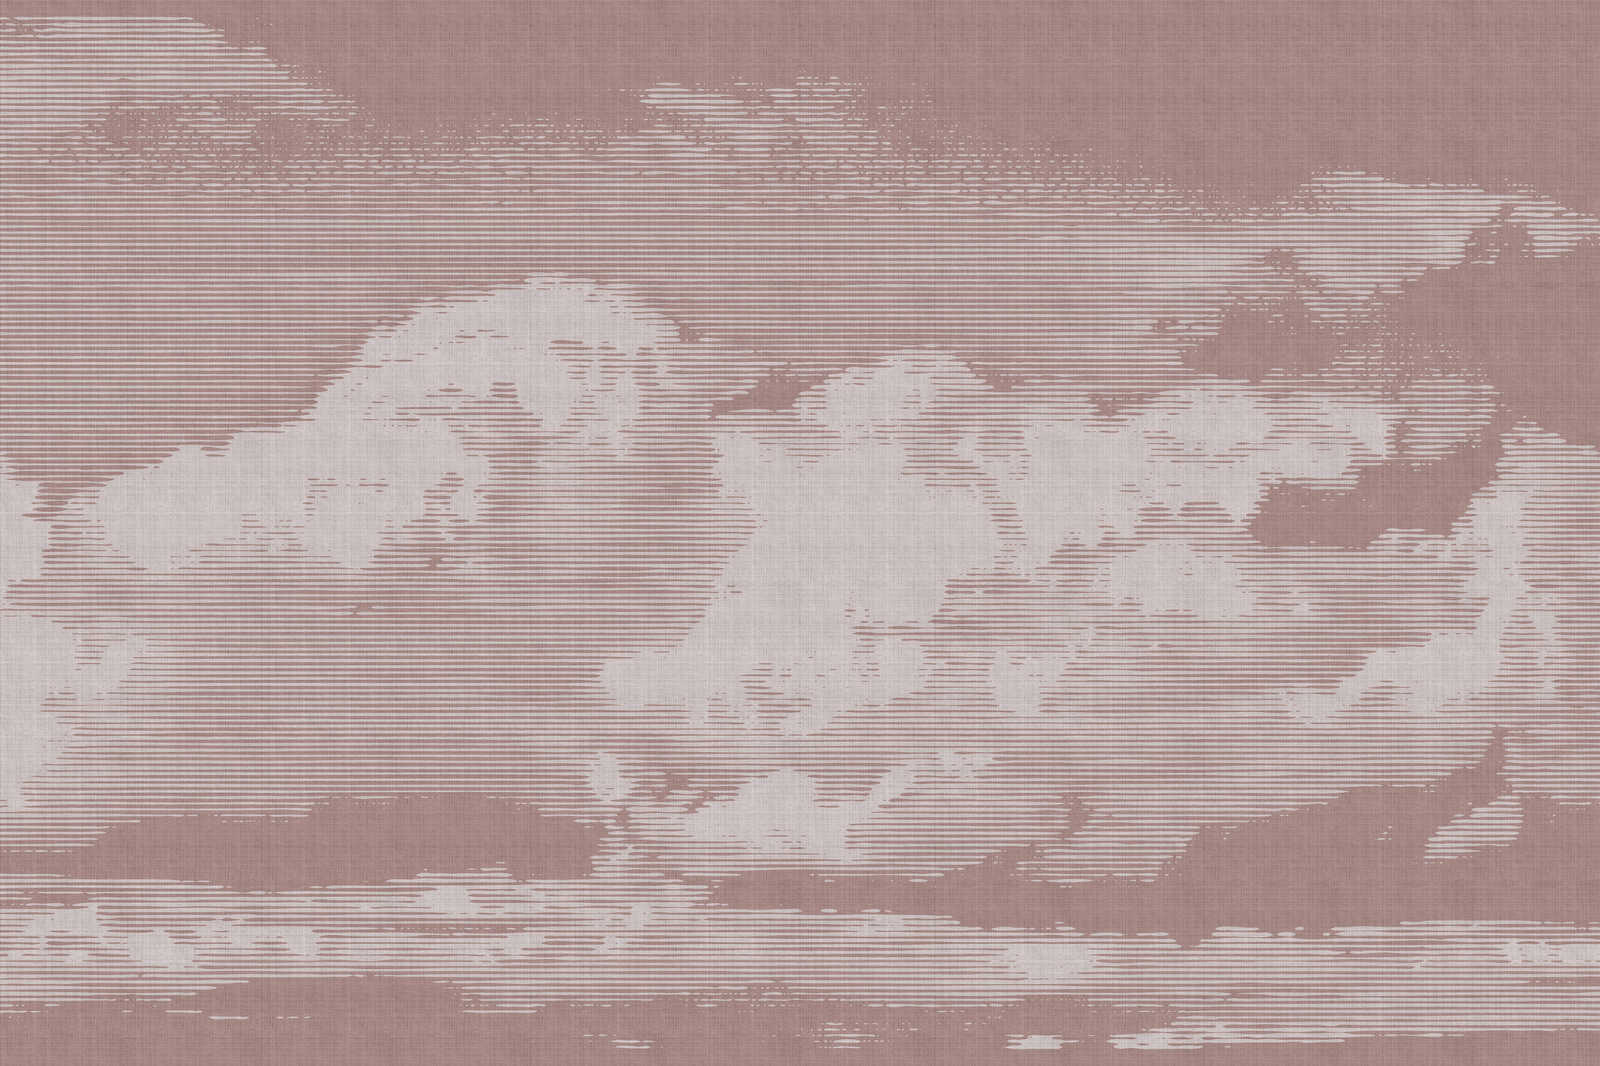             Clouds 3 - Heavenly canvas picture with cloud motif - Nature linen look - 0.90 m x 0.60 m
        